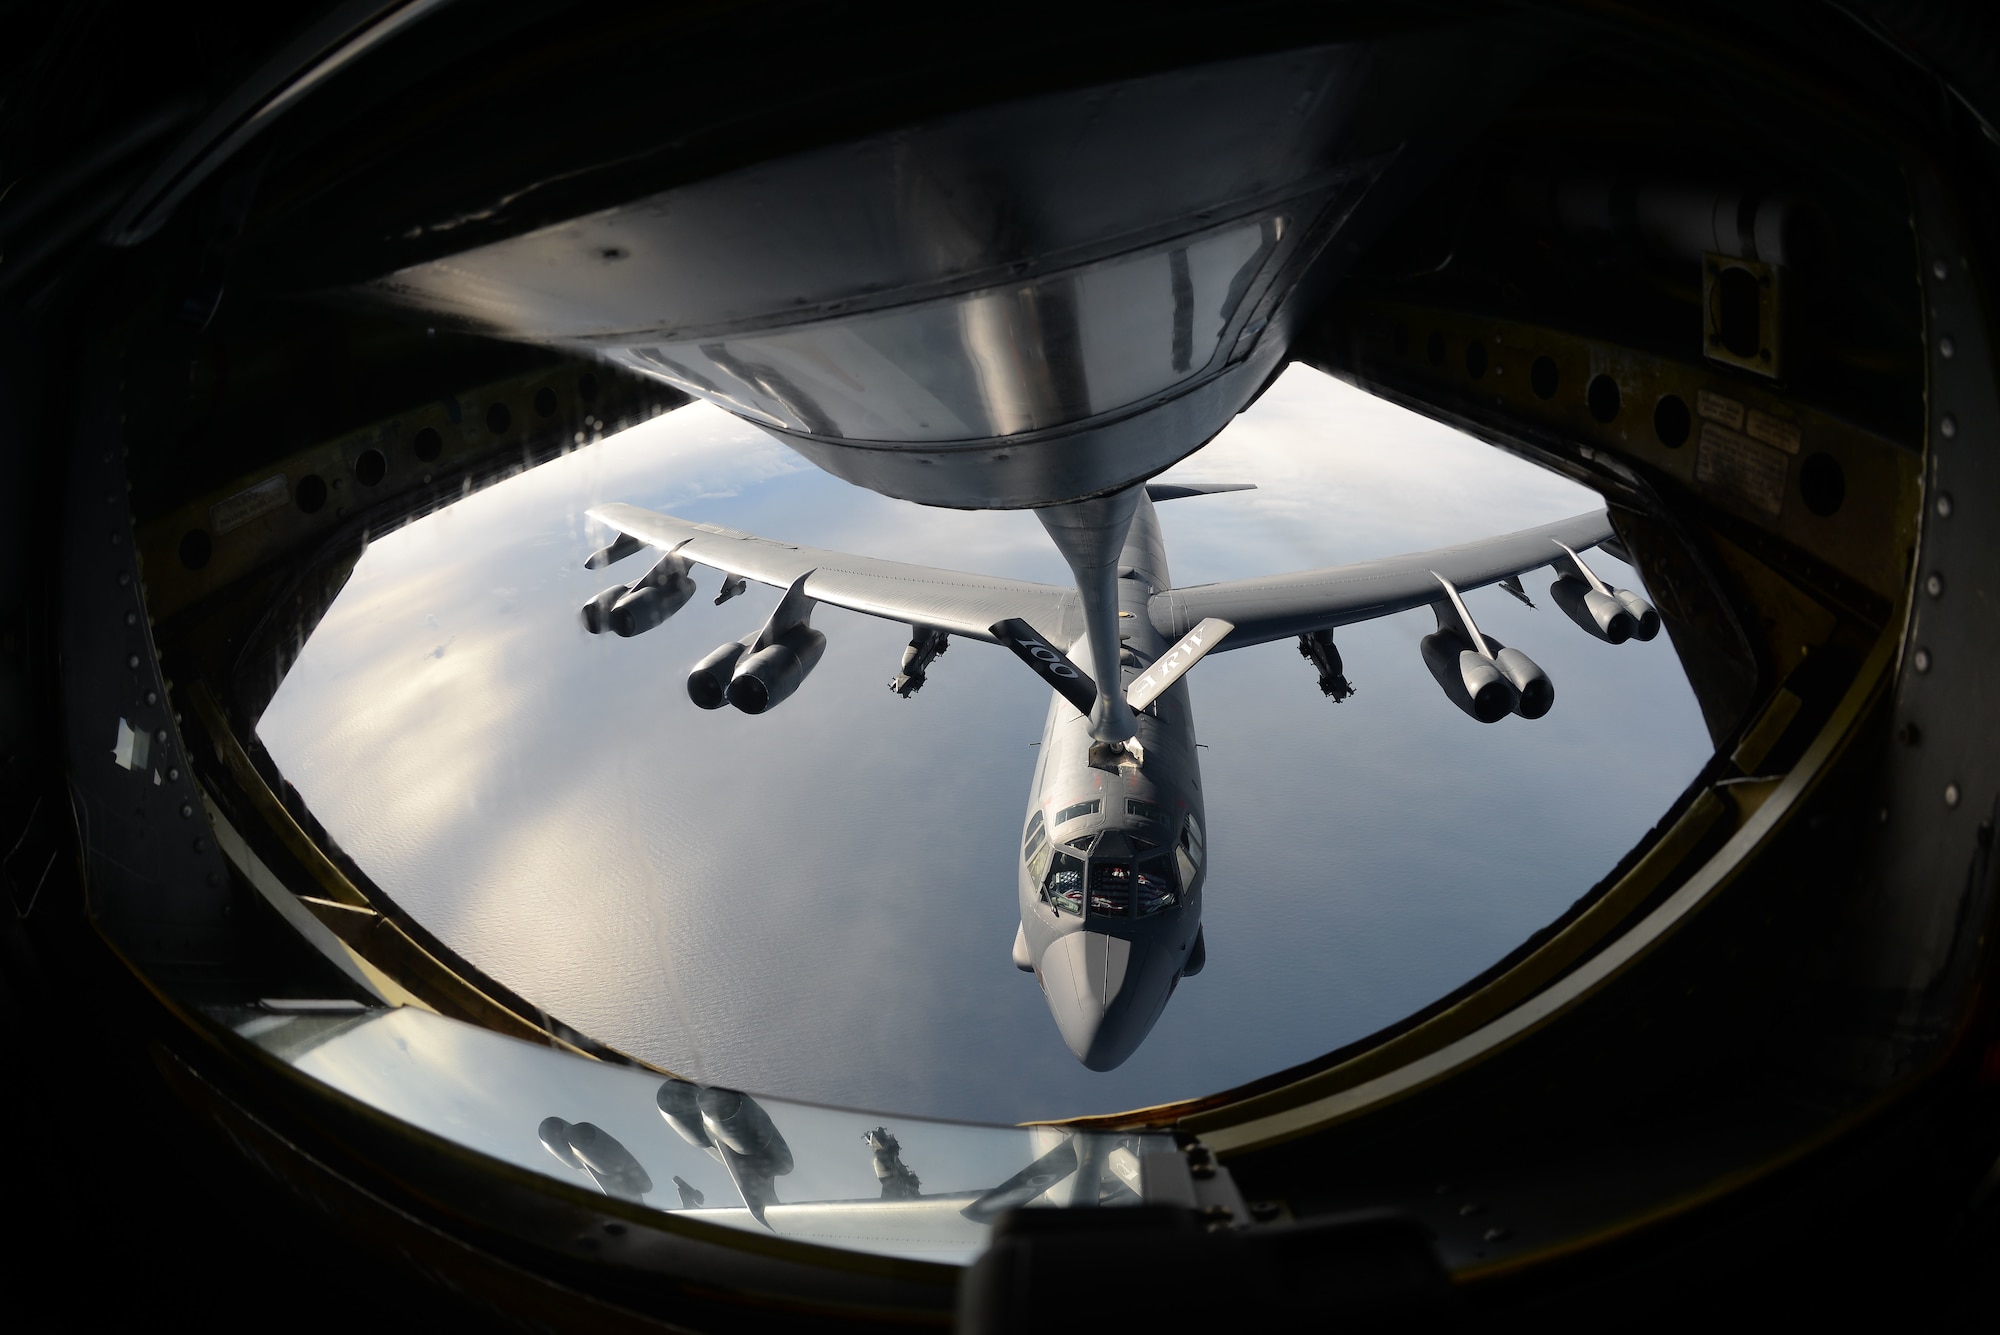 A U.S. Air Force B-52 Stratofortress receives fuel from a U.S. Air Force KC-135 Stratotanker during an air-refueling mission off the coast of Norway, Sept. 15, 2018. The purpose of the flight was to conduct theater familiarization for aircrew members and to demonstrate U.S. commitment to allies and partners through the global employment of our military forces. (U.S. Air Force photo by Senior Airman Luke Milano)